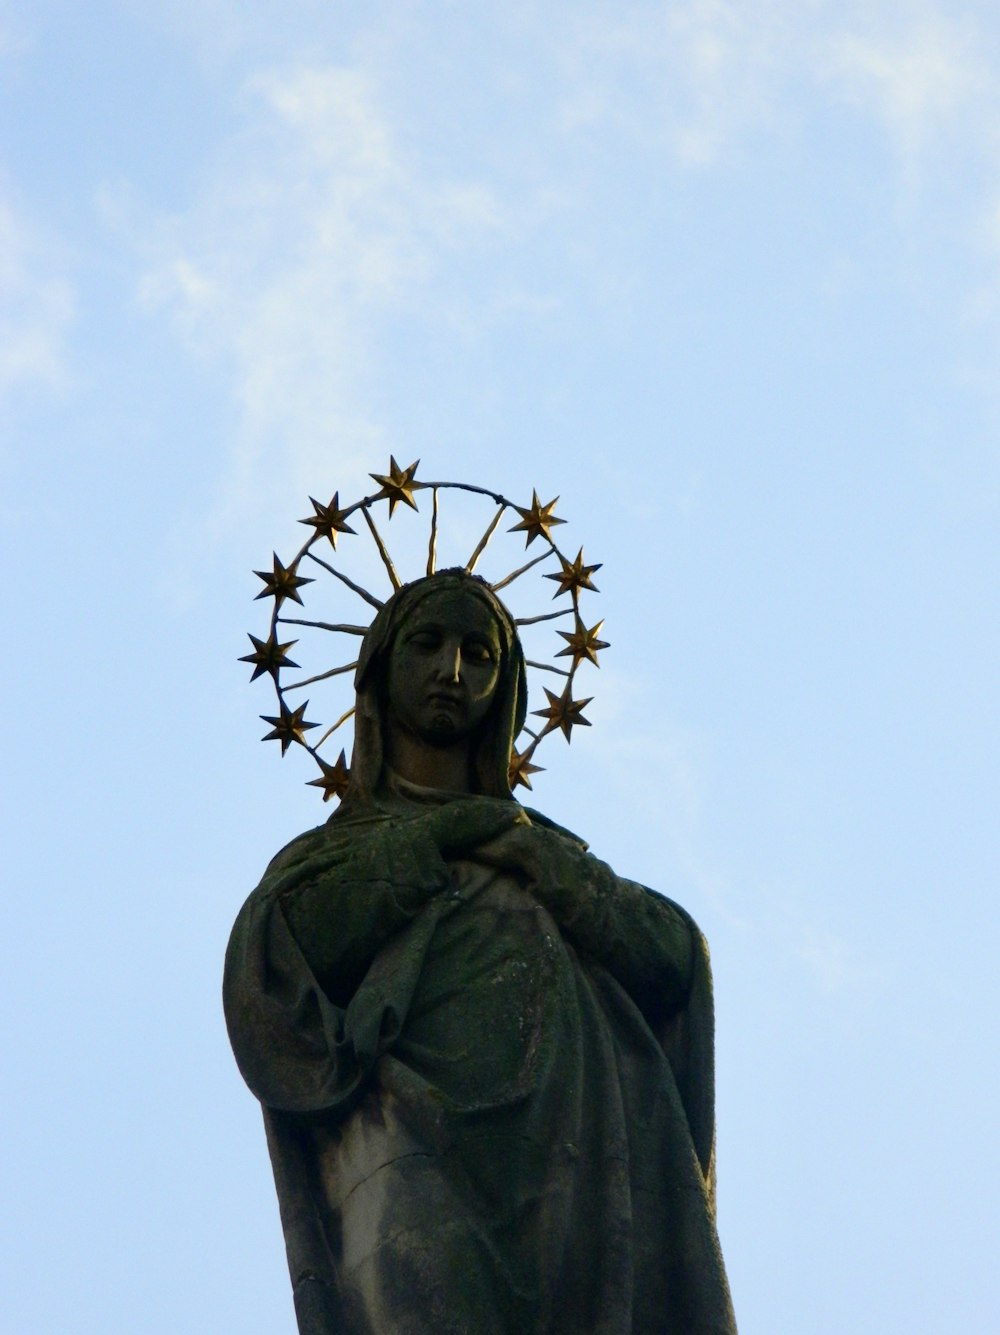 a statue of a person with a crown and cross on top